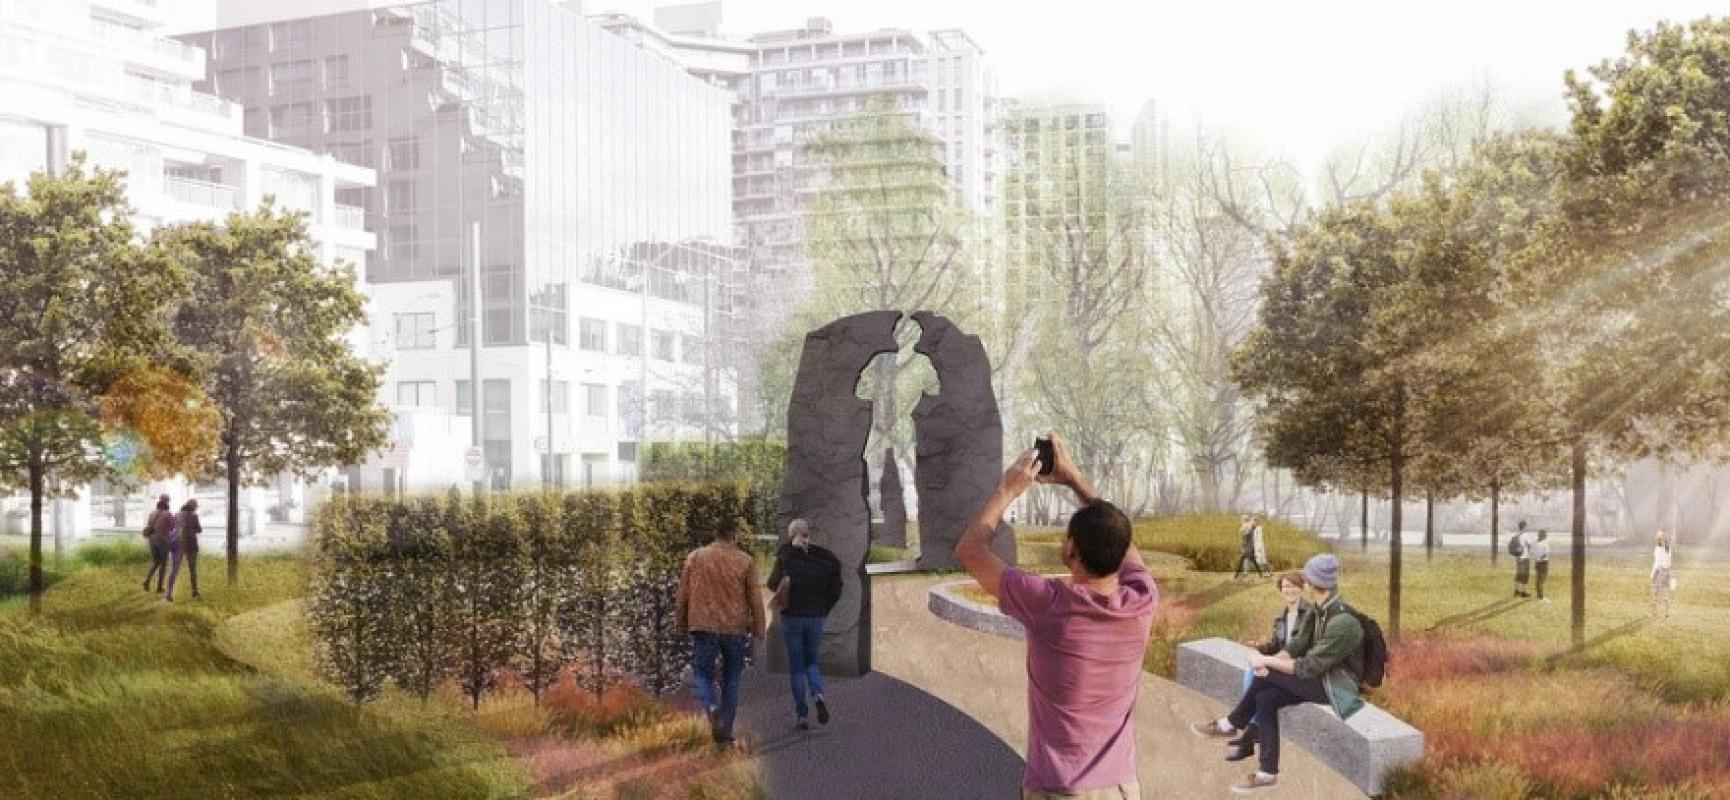 an artist rendering of the Legacy Art Project honouring Terry Fox